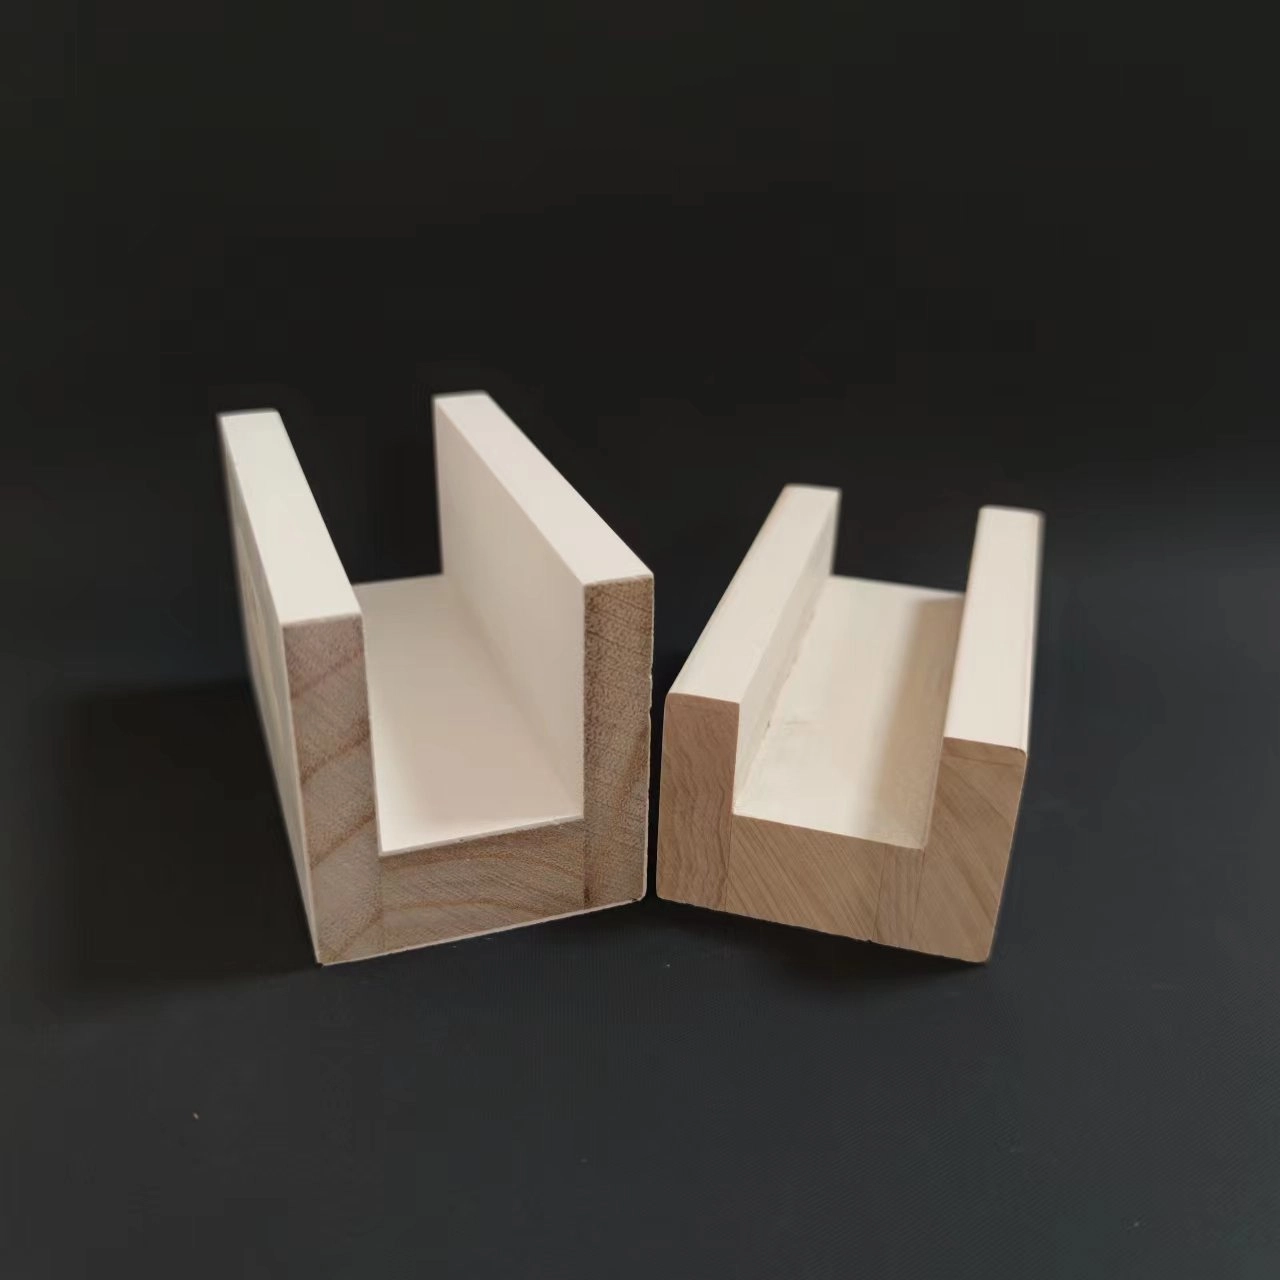 China China Wooden Components manufacturer, Wooden Components Supplier, Wooden Components Factory manufacturer